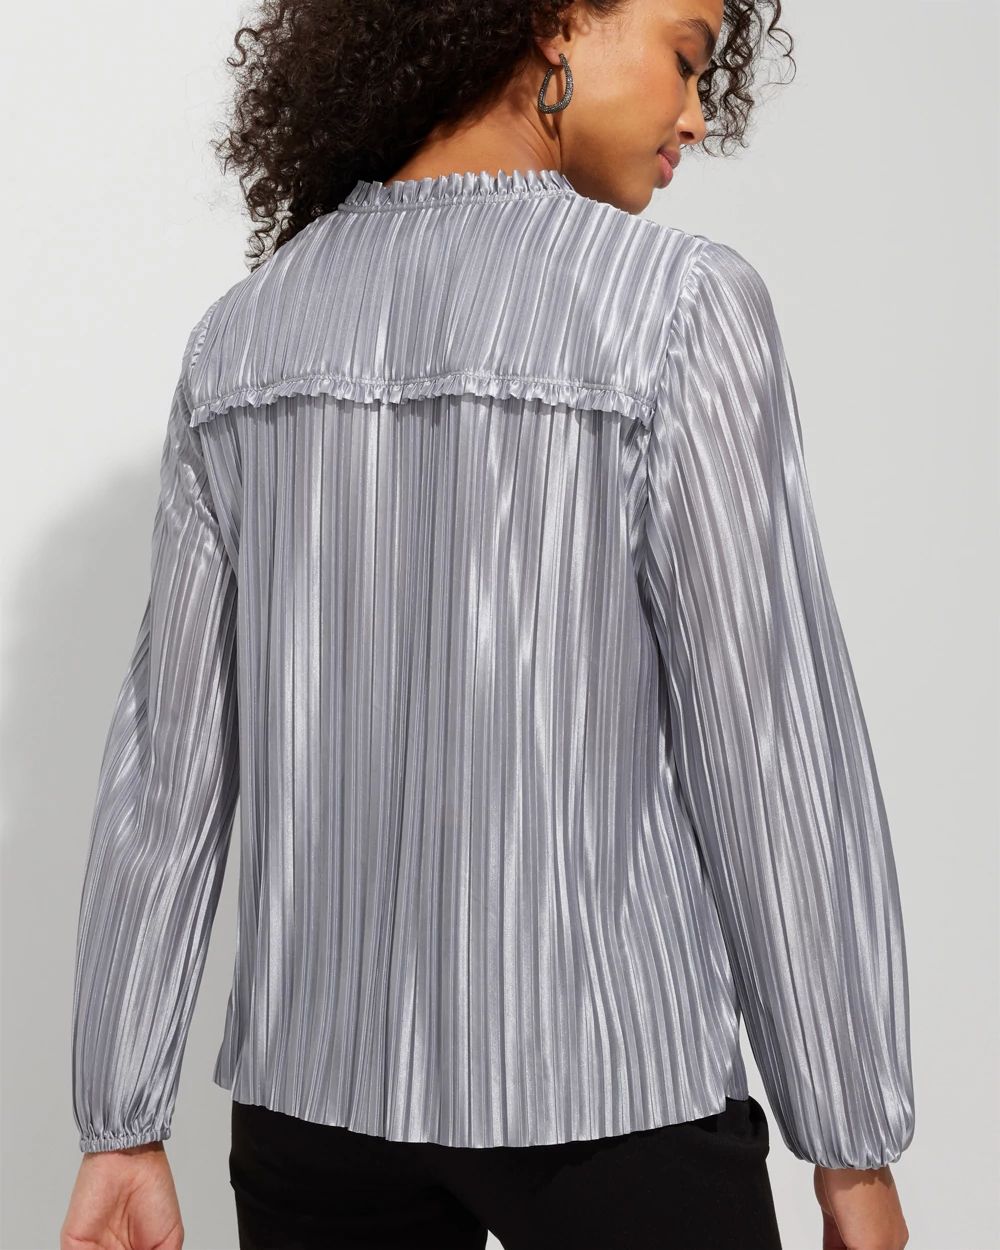 Outlet WHBM Long Sleeve Pleated Yoke Blouse click to view larger image.